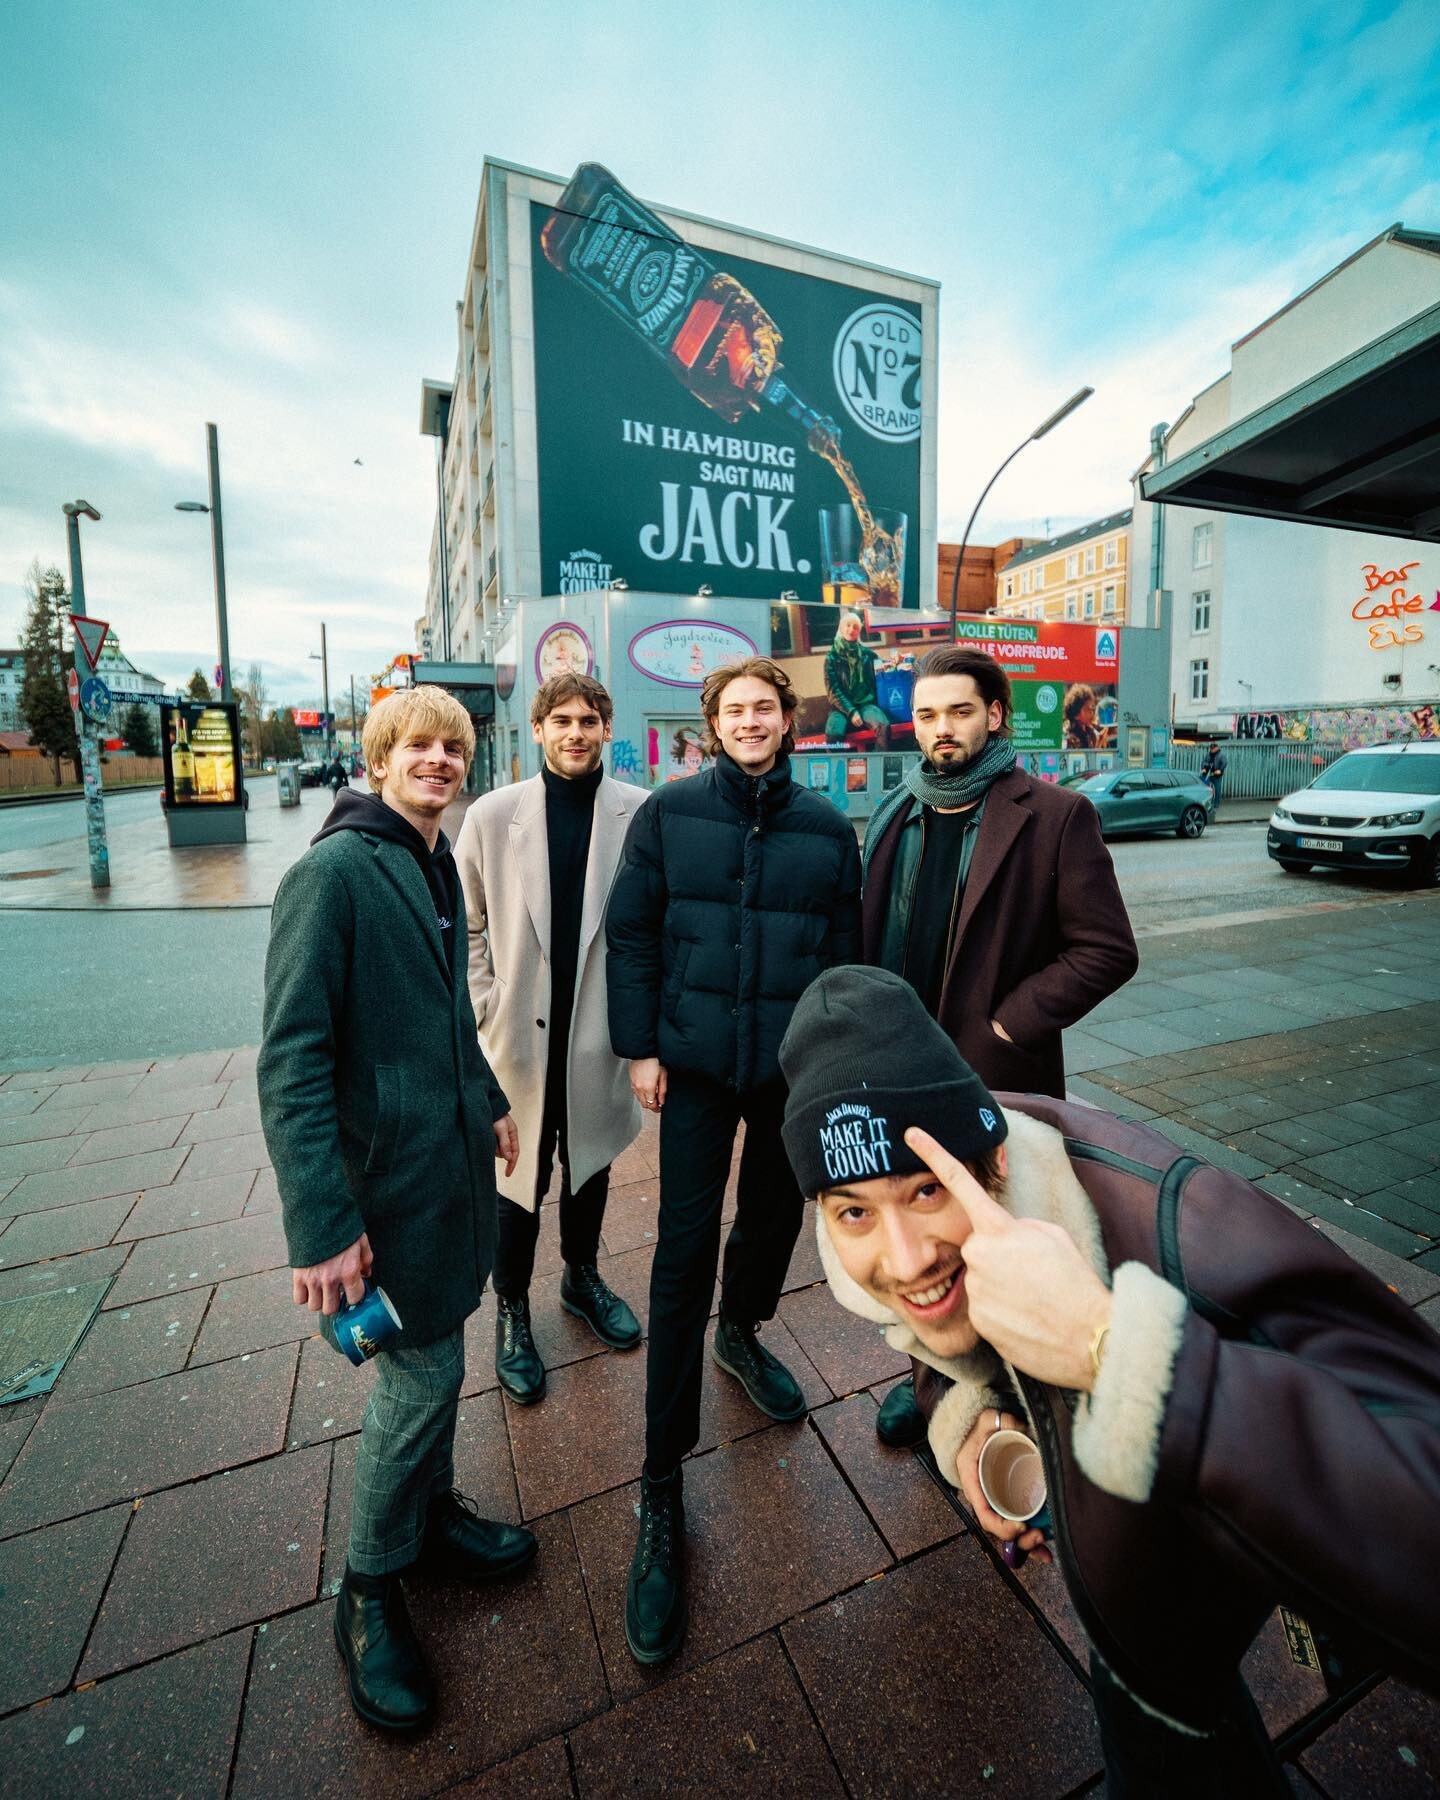 Hey, here&rsquo;s a cute pic from Hamburg. Also&hellip; 

🥁🥁drum roll🥁🥁

CARPE DIEM WORLD PREMIERE - TOMORROW AT 20.00 CET ON @rtv.slovenija 

AVAILABLE ON ALL MUSIC STREAMING PLATFORMS AT 21.00 CET

c u then

Joker Out ❤️

📷: @mark_pirc